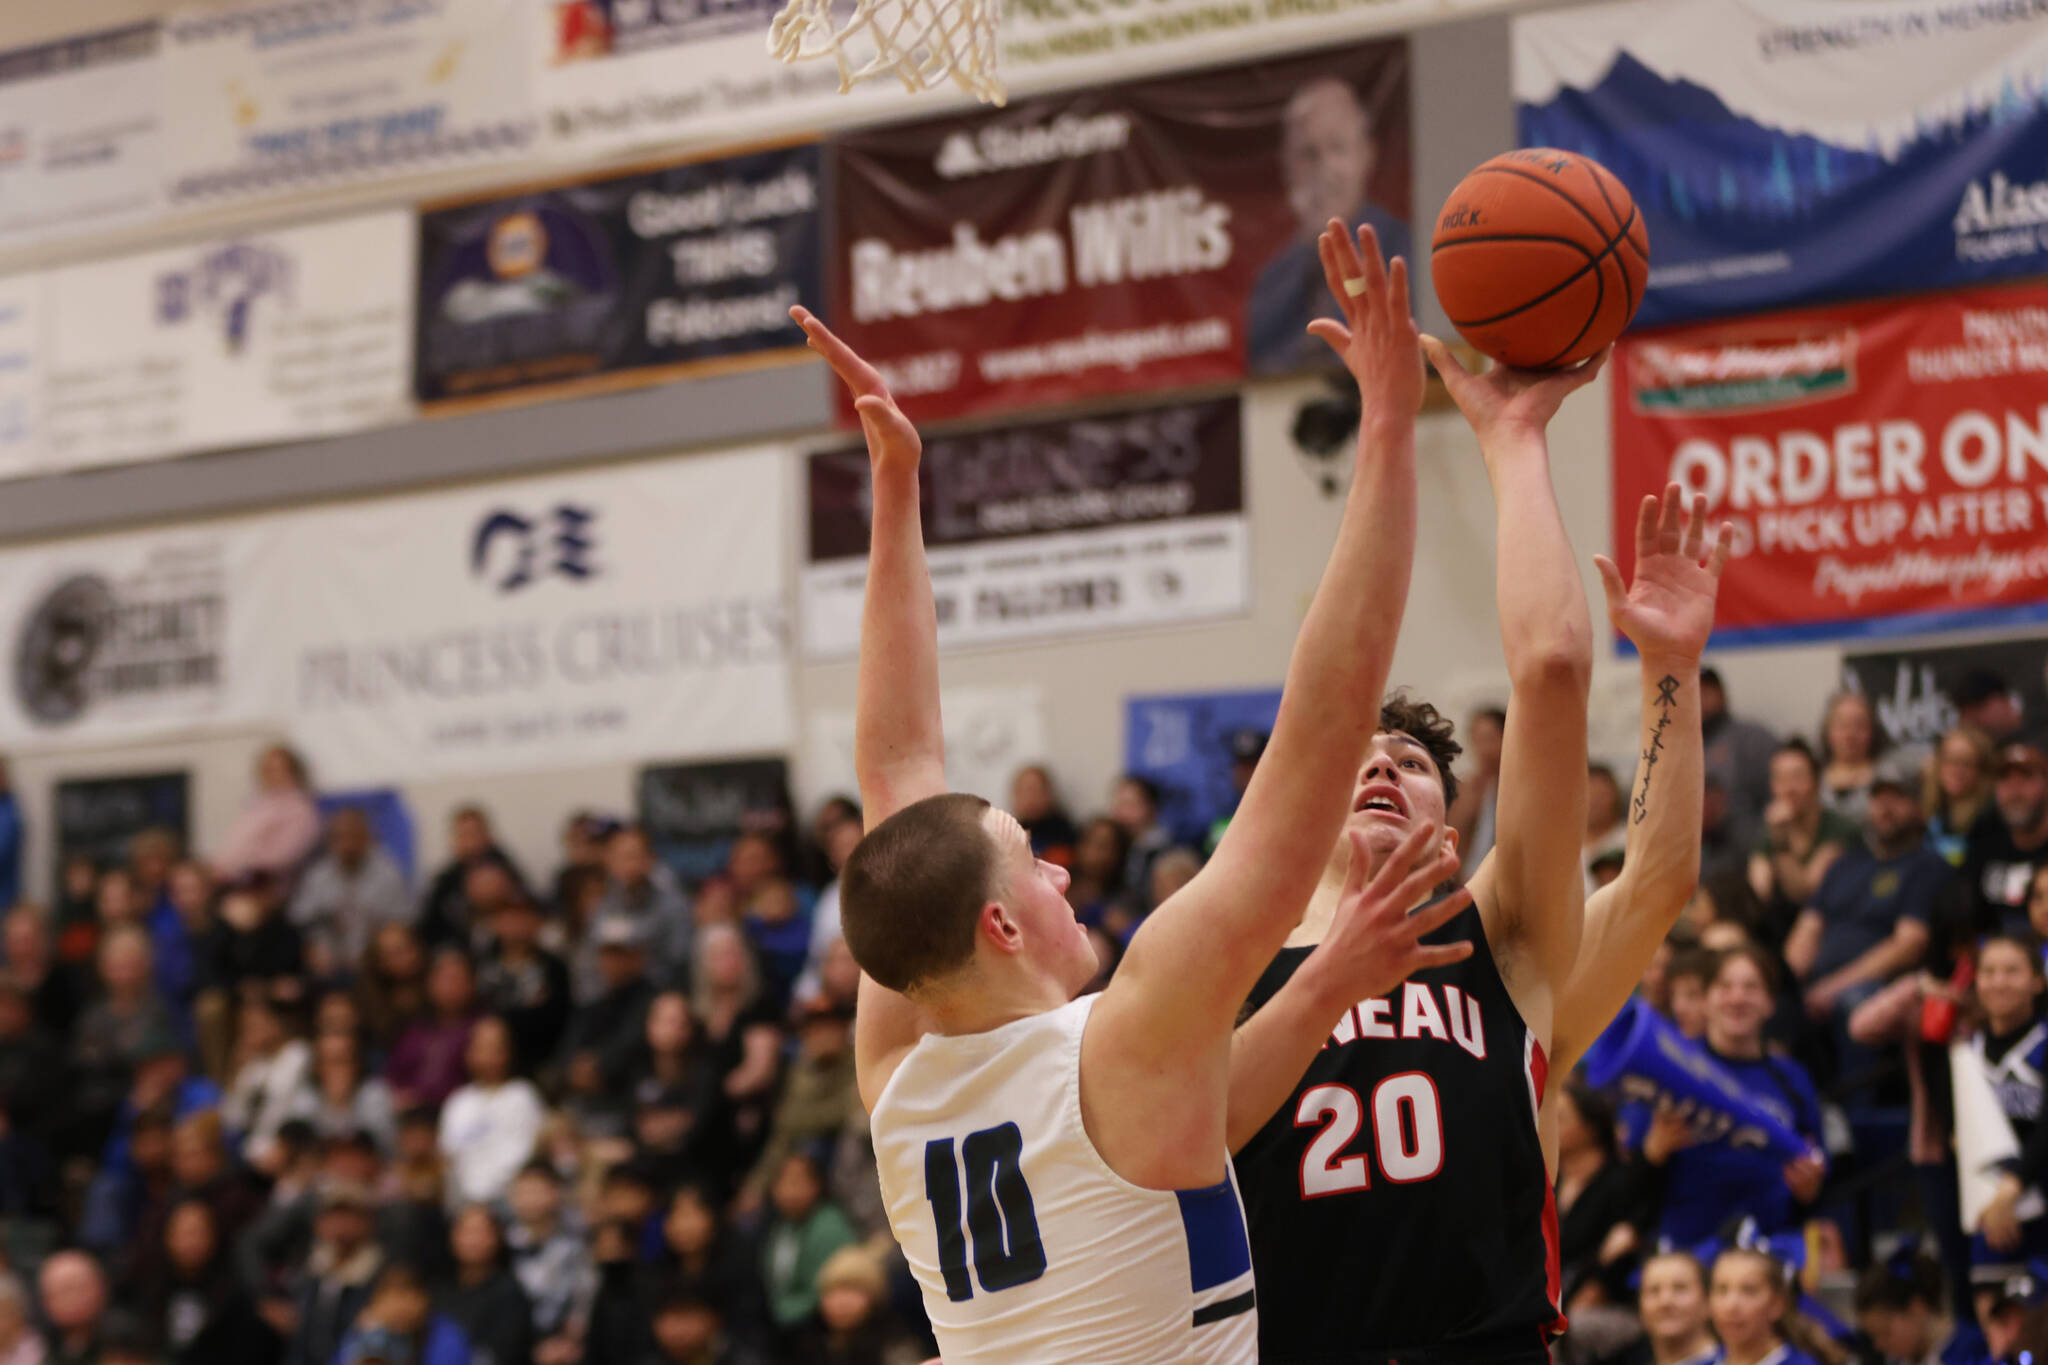 Ben Hohenstatt / Juneau Empire 
JDHS senior Orion Dybdahl (20) shoots over the outstretched arms of TMHS junior James Polasky (10) early in a Crimson Bears comeback win at Thunder Mountain High School. Dybdahl led his team in scoring with 17 points, including 6 points in the fourth quarter.